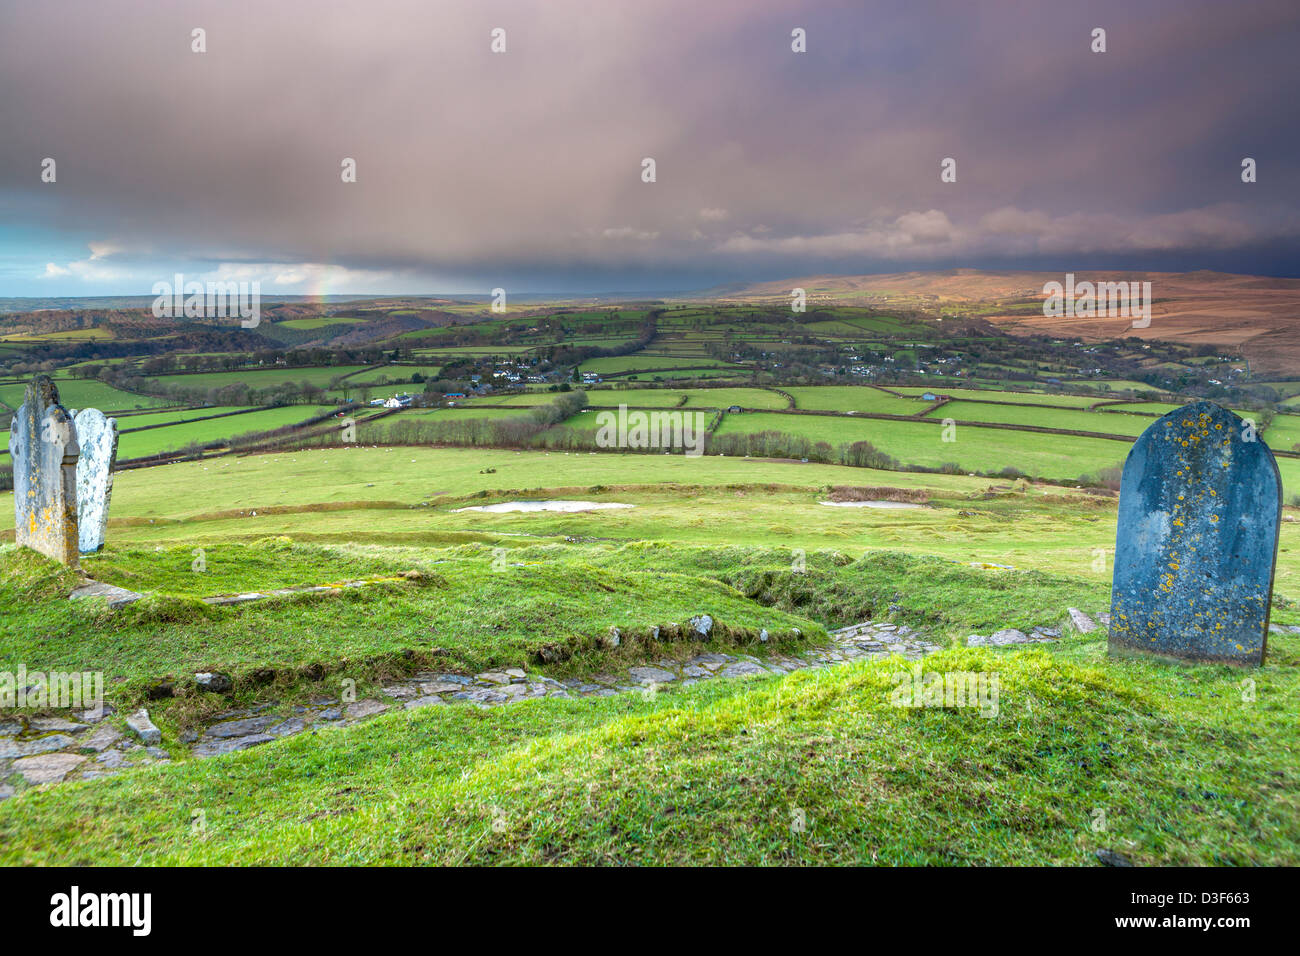 View from the Church of St Michael on top of Brent Tor over the rural Dartmoor landscape, Devon, England, UK, Europe. Stock Photo